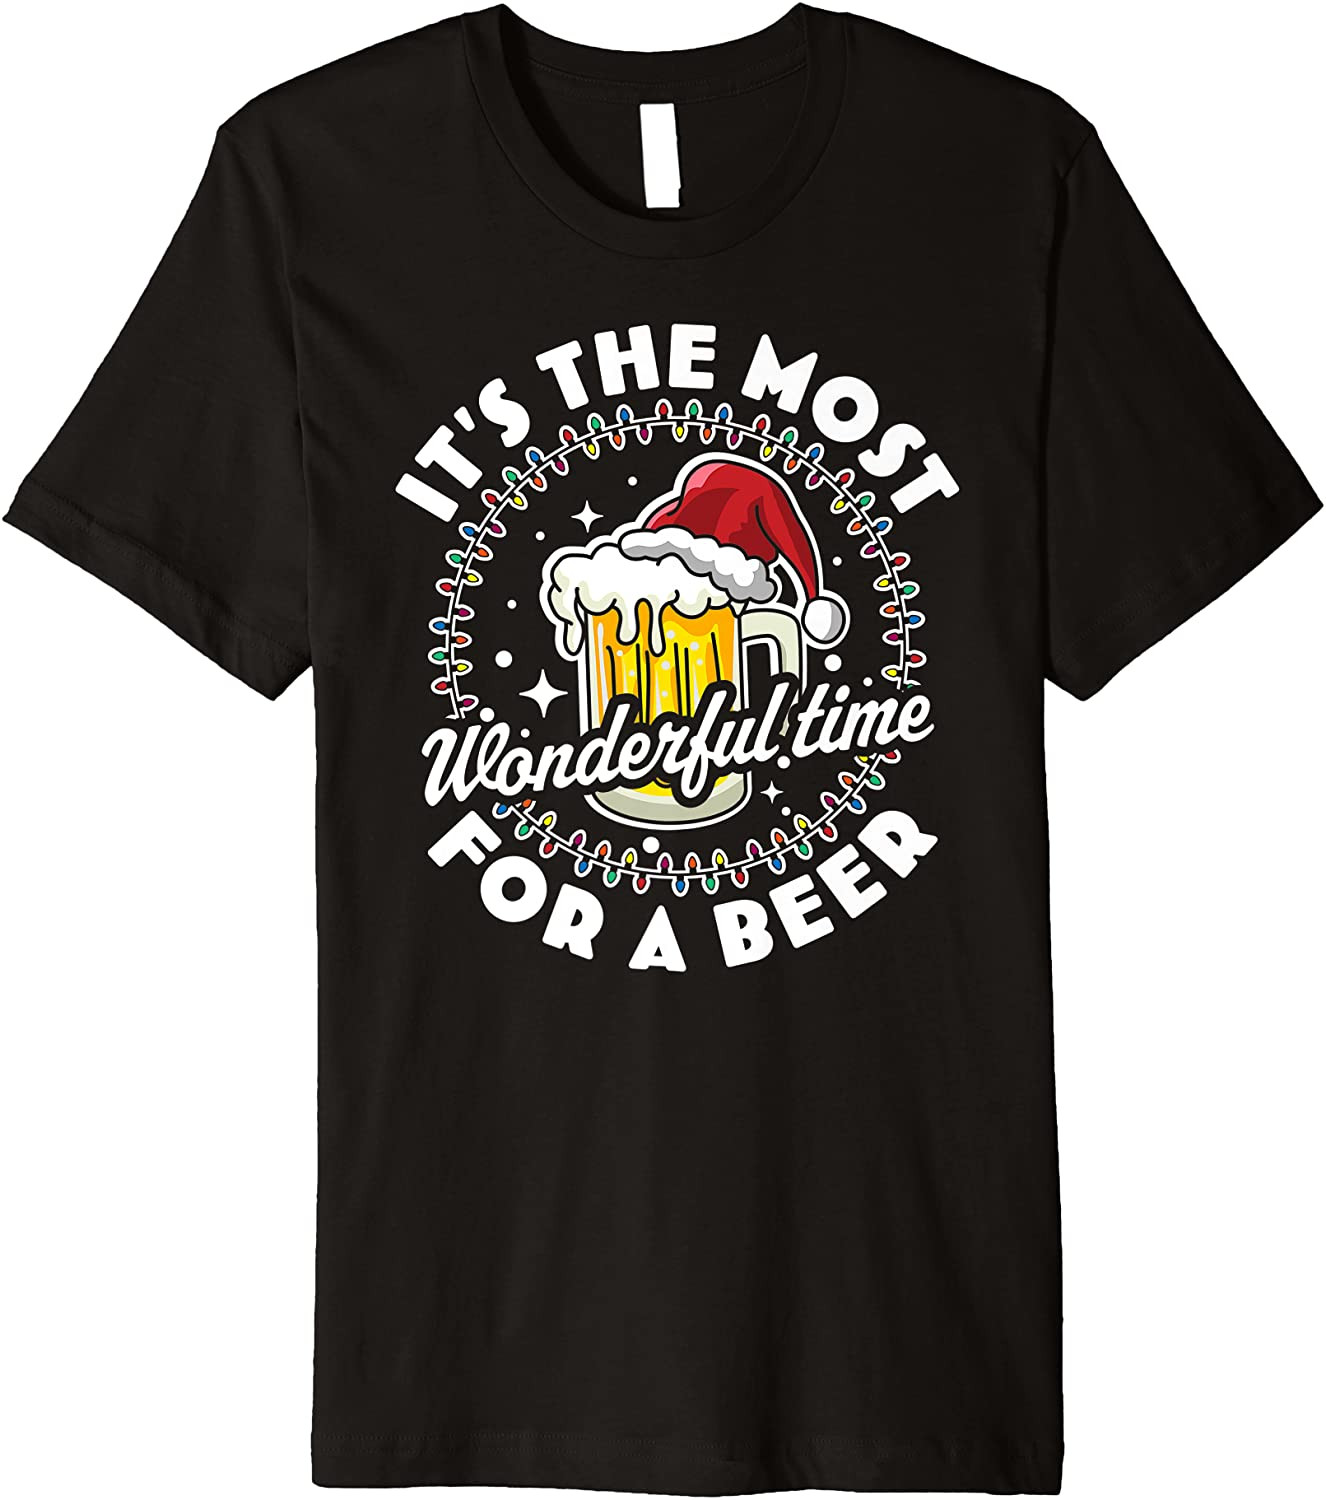 It's The Most Wonderful Time For A Beer - Beer Drinking Xmas T-Shirt